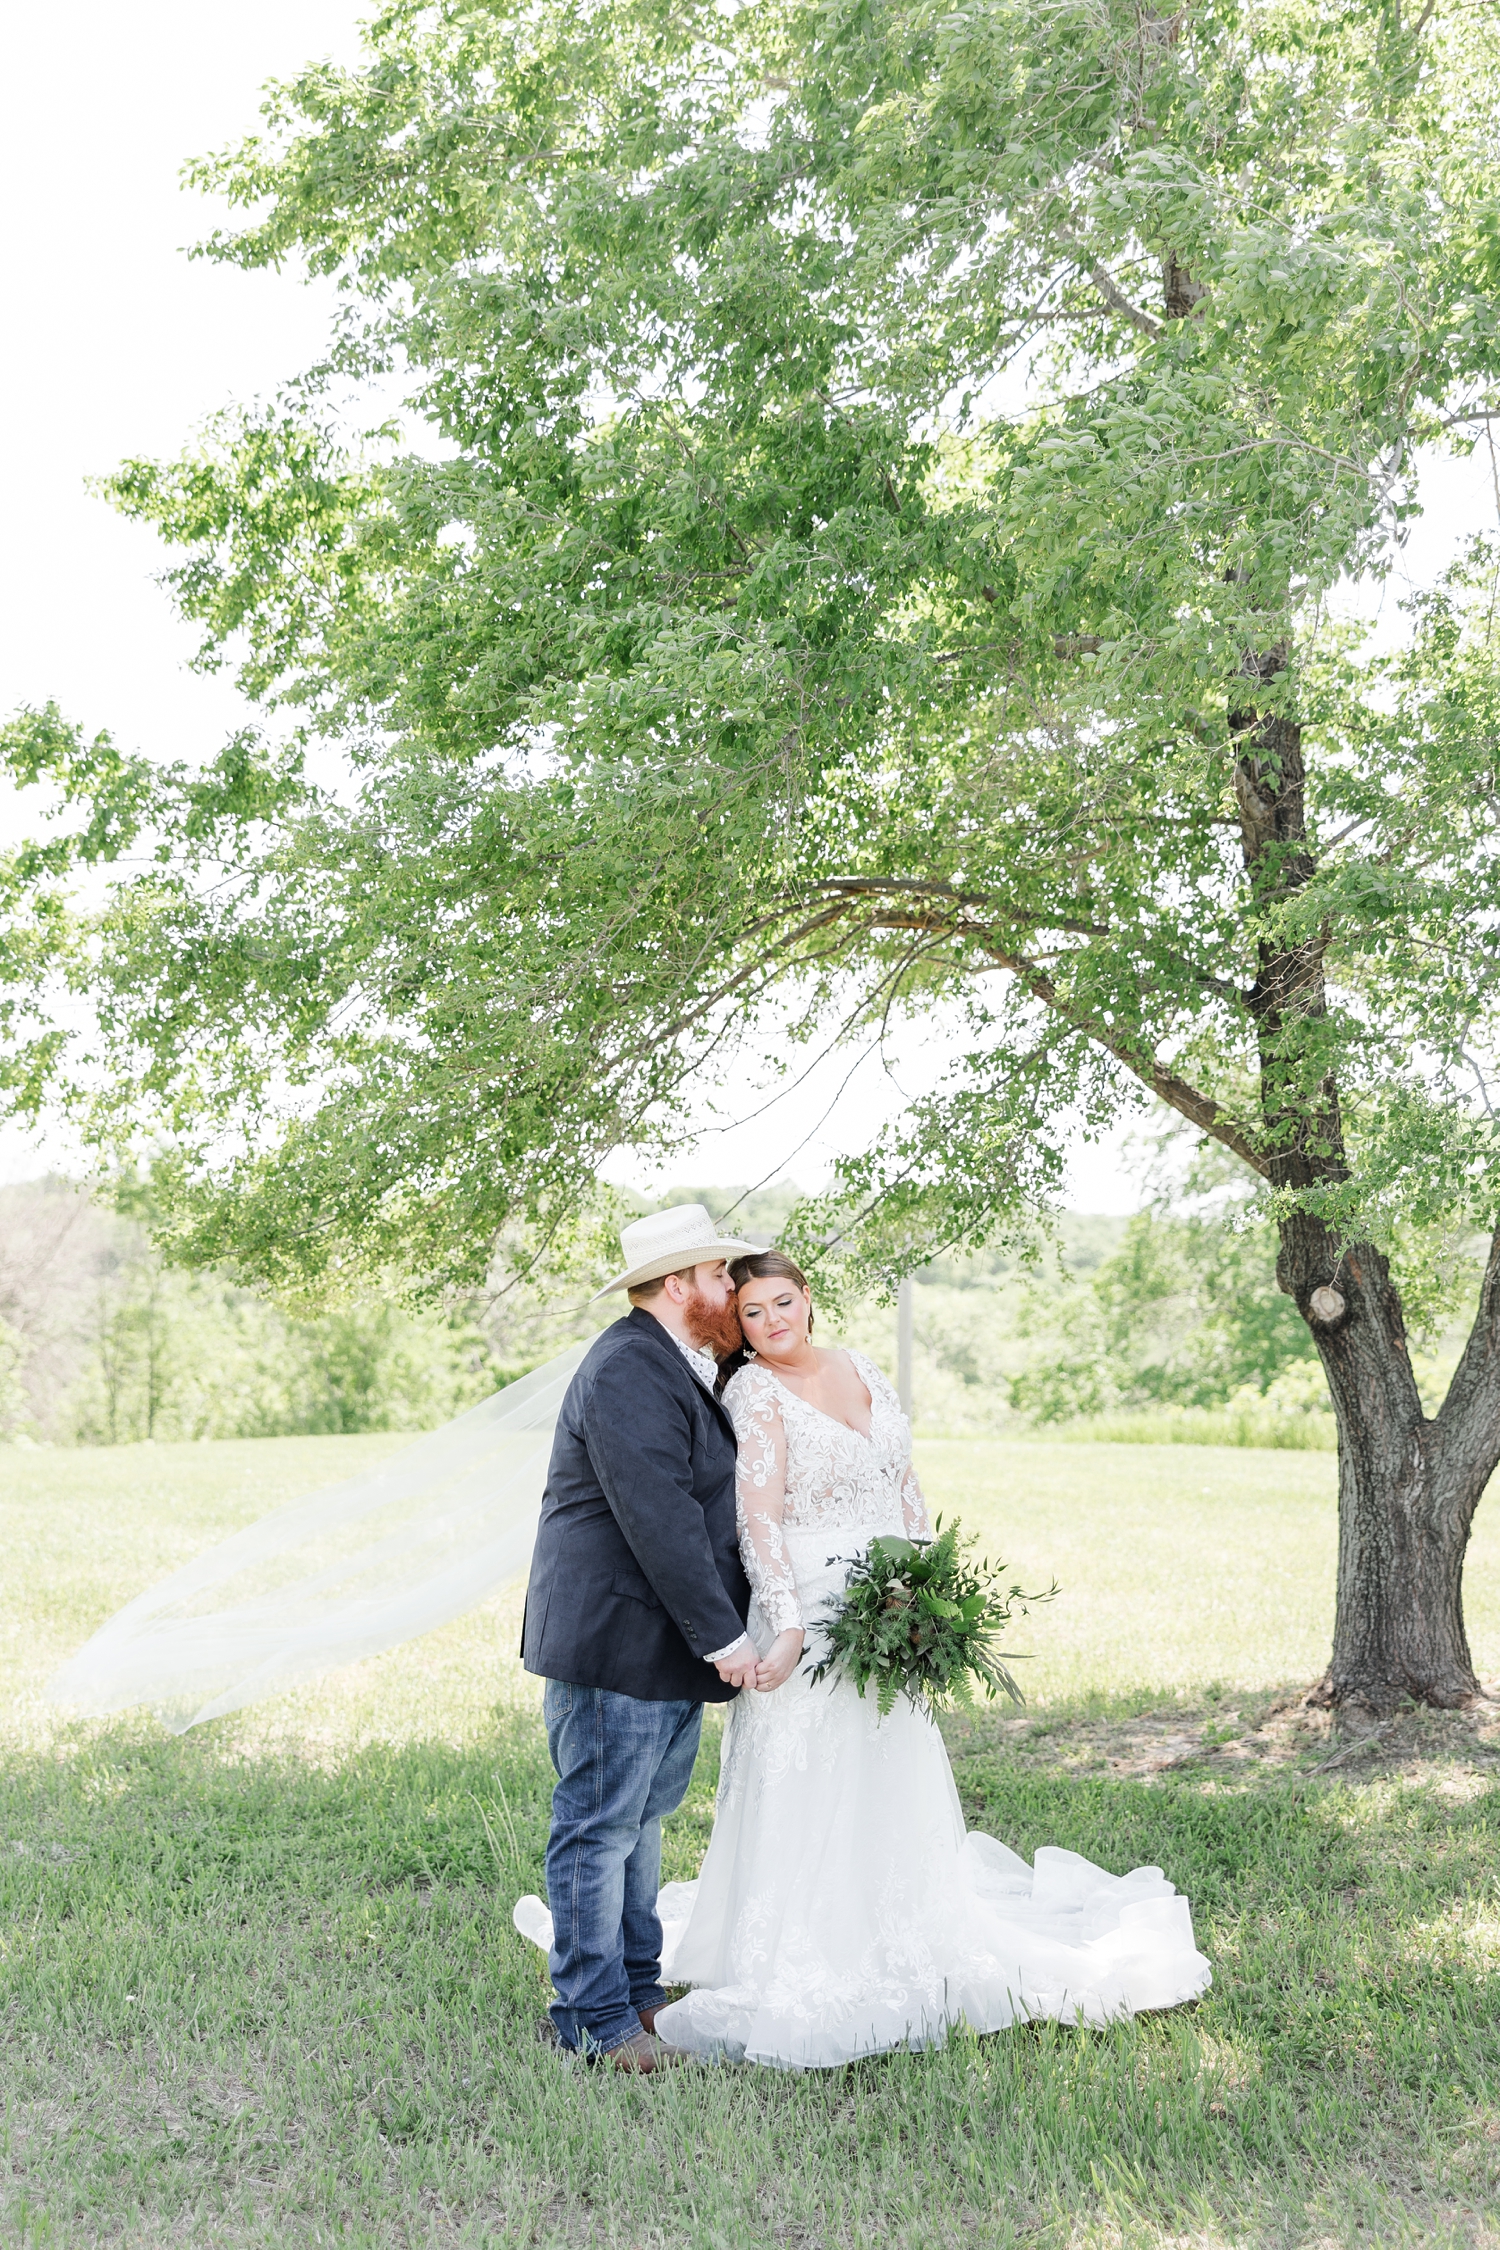 Trent kiss his new bride, Neely, on the cheek under a beautiful tree at Lizard Creek Ranch in Fort Dodge, IA | CB Studio